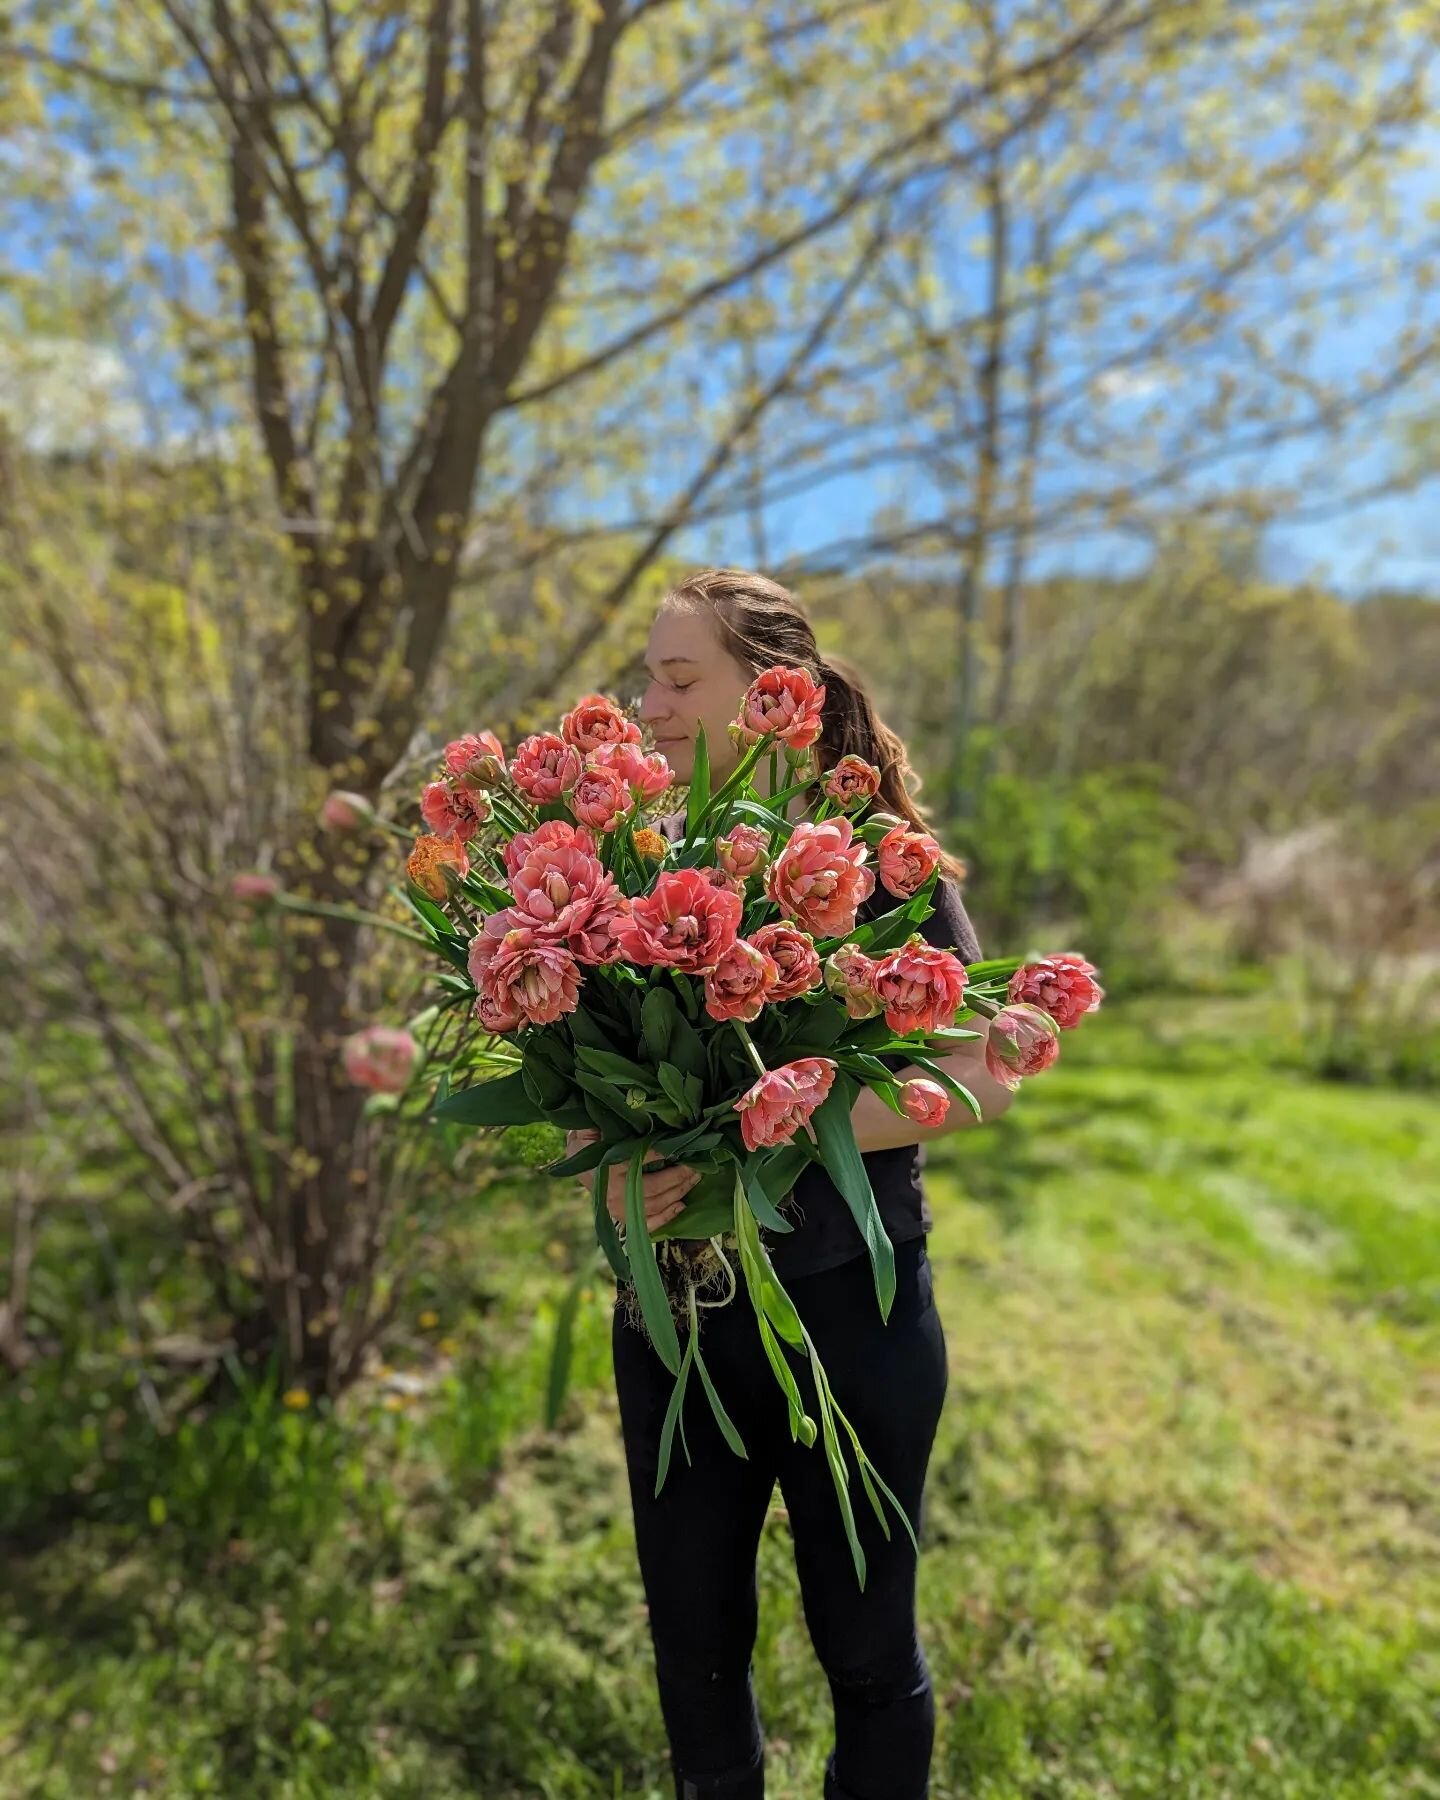 Spring at last. The tulips are all coming in to bloom this week and my oh my are they gorgeous! We'll have a beautiful, fresh abundance available to purchase on the farm next Friday May 12th and Saturday May 13th. Don't forget to mark your calendars!